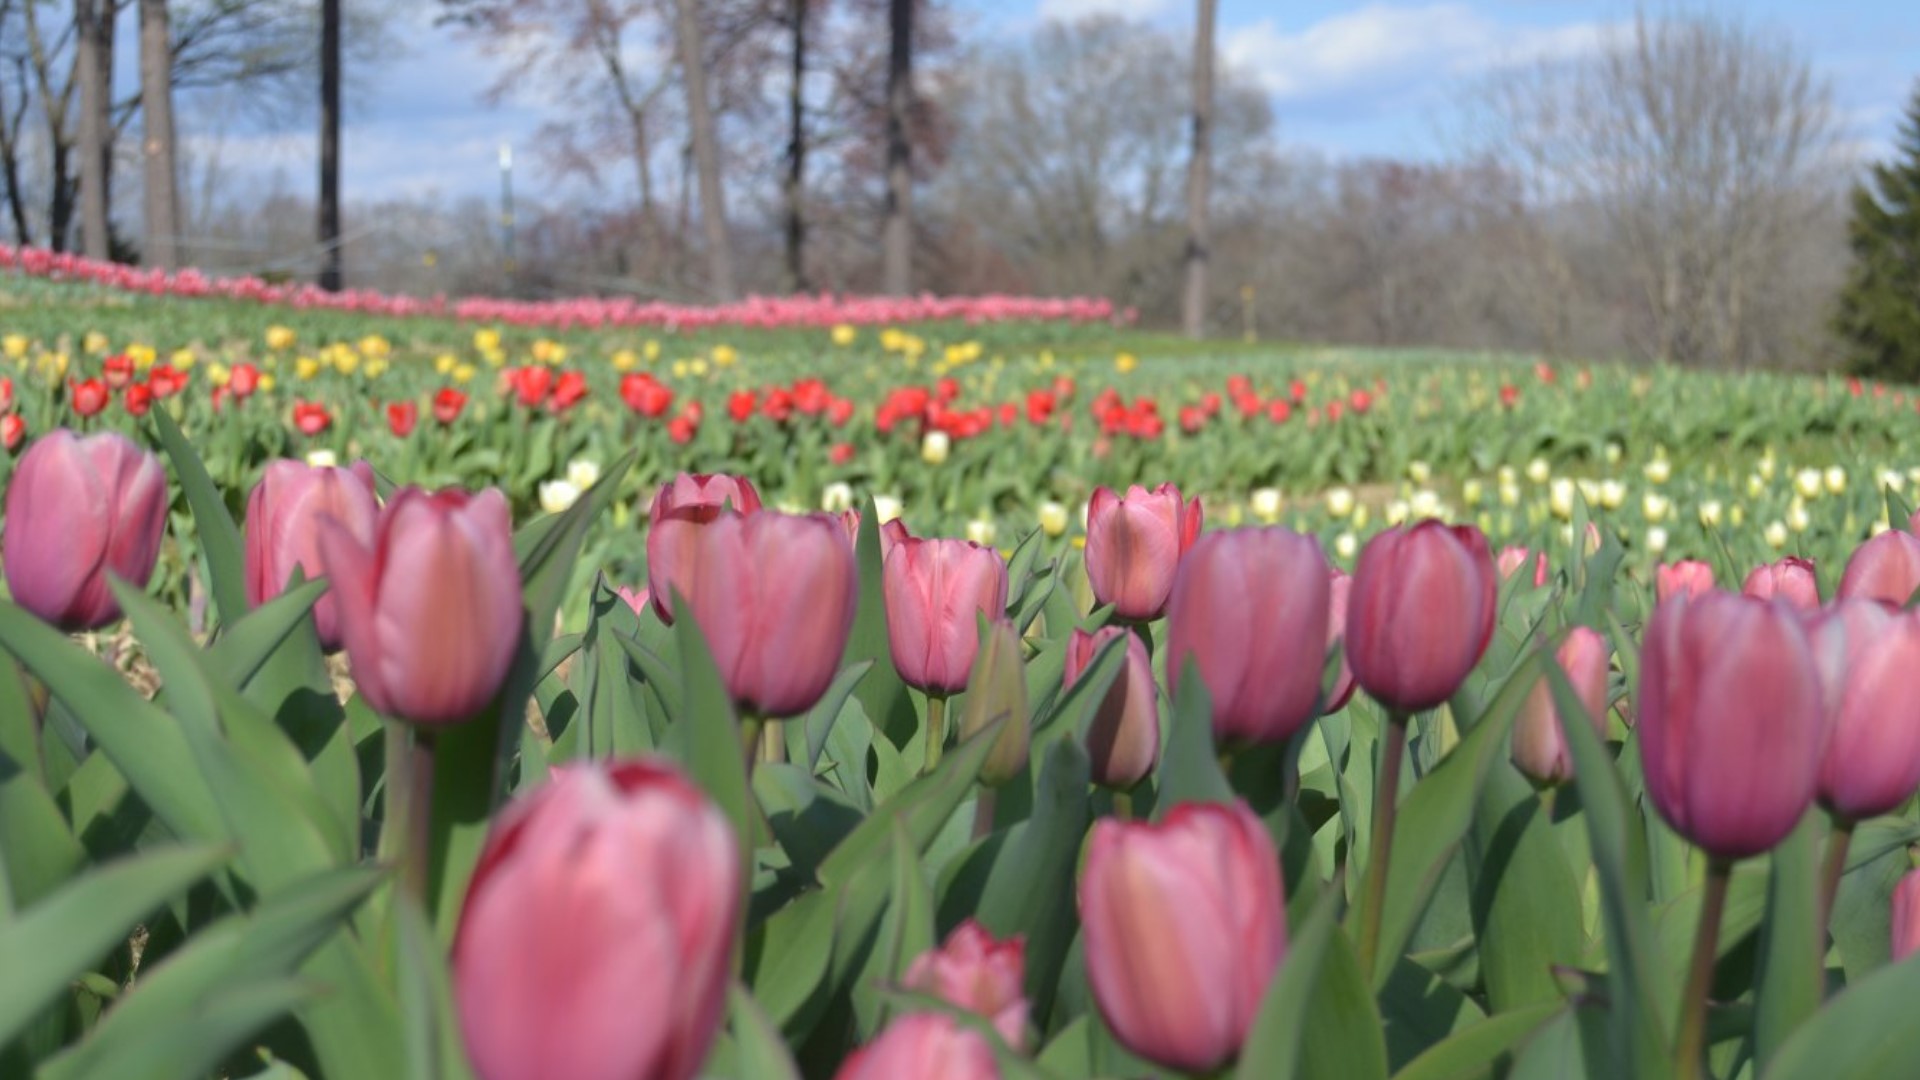 Time to tiptoe through the Dewberry Farm's tulips and while you're at it -- stop and pick a few. You can even take photos. The farm is located in Kernersville.